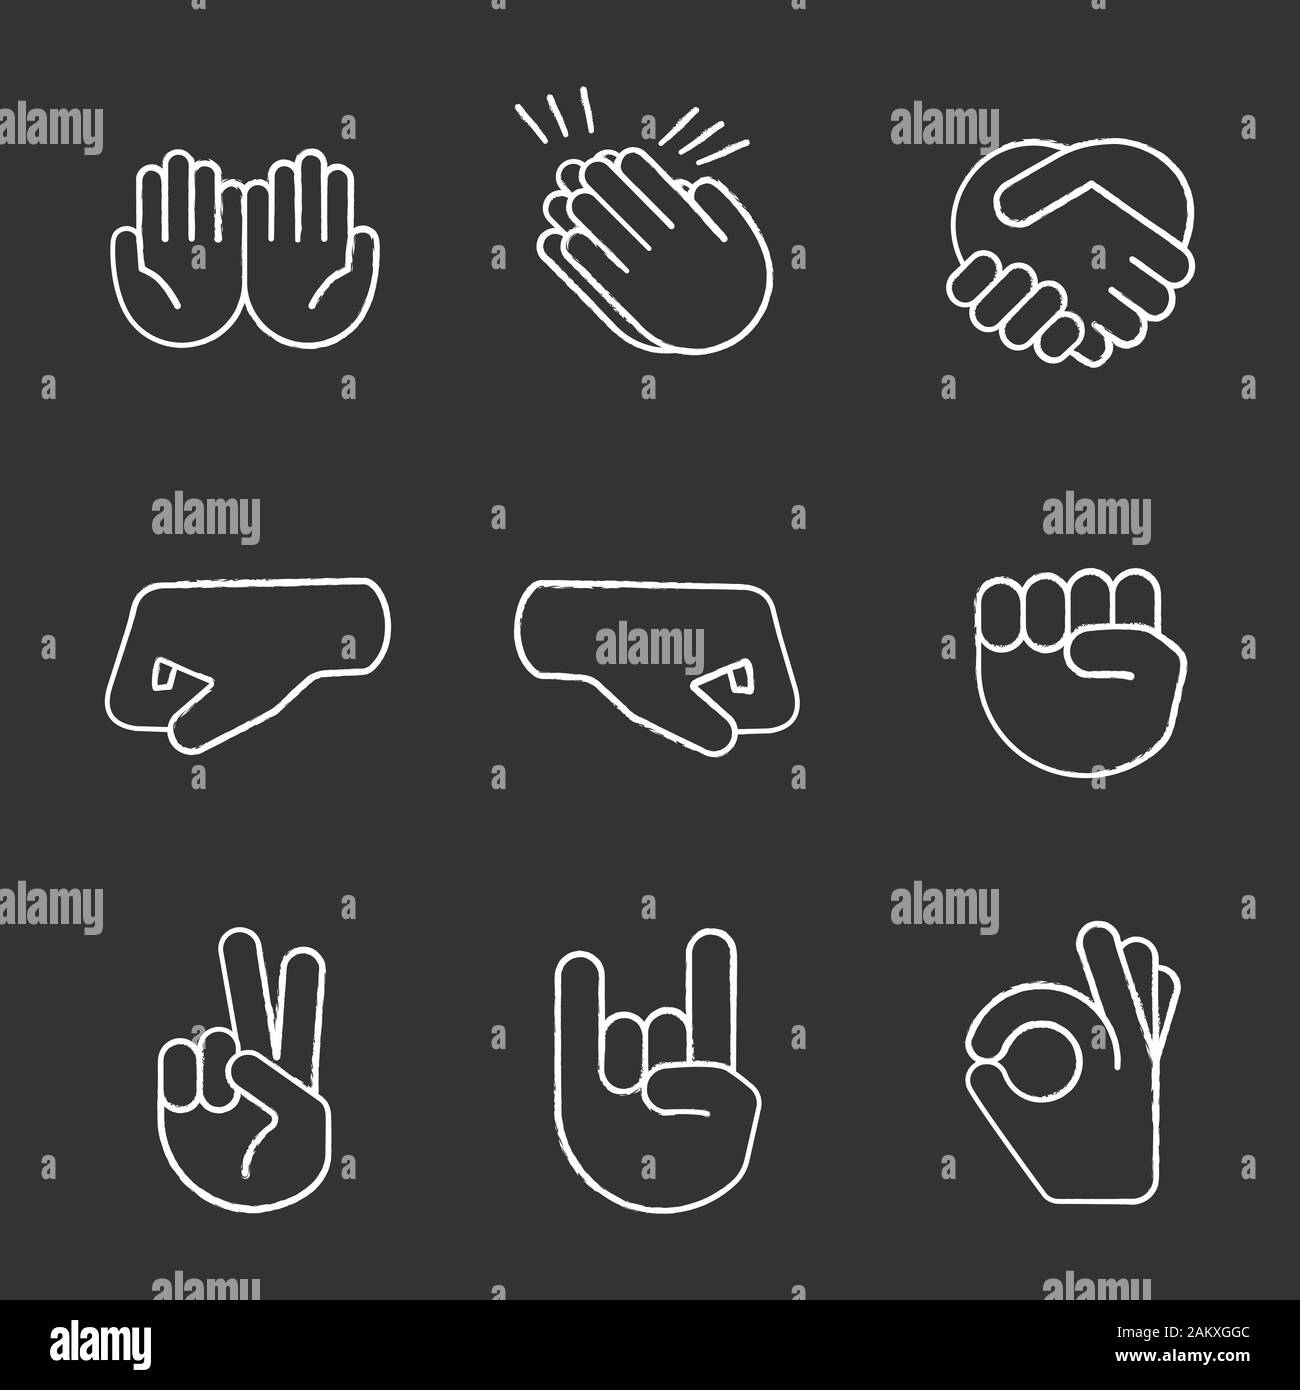 Hand gesture emojis icons collection. Handshake, biceps, applause, thumb,  peace, rock on, ok, folder hands gesturing. Set of different emoticon hands  isolated vector illustration., Stock vector